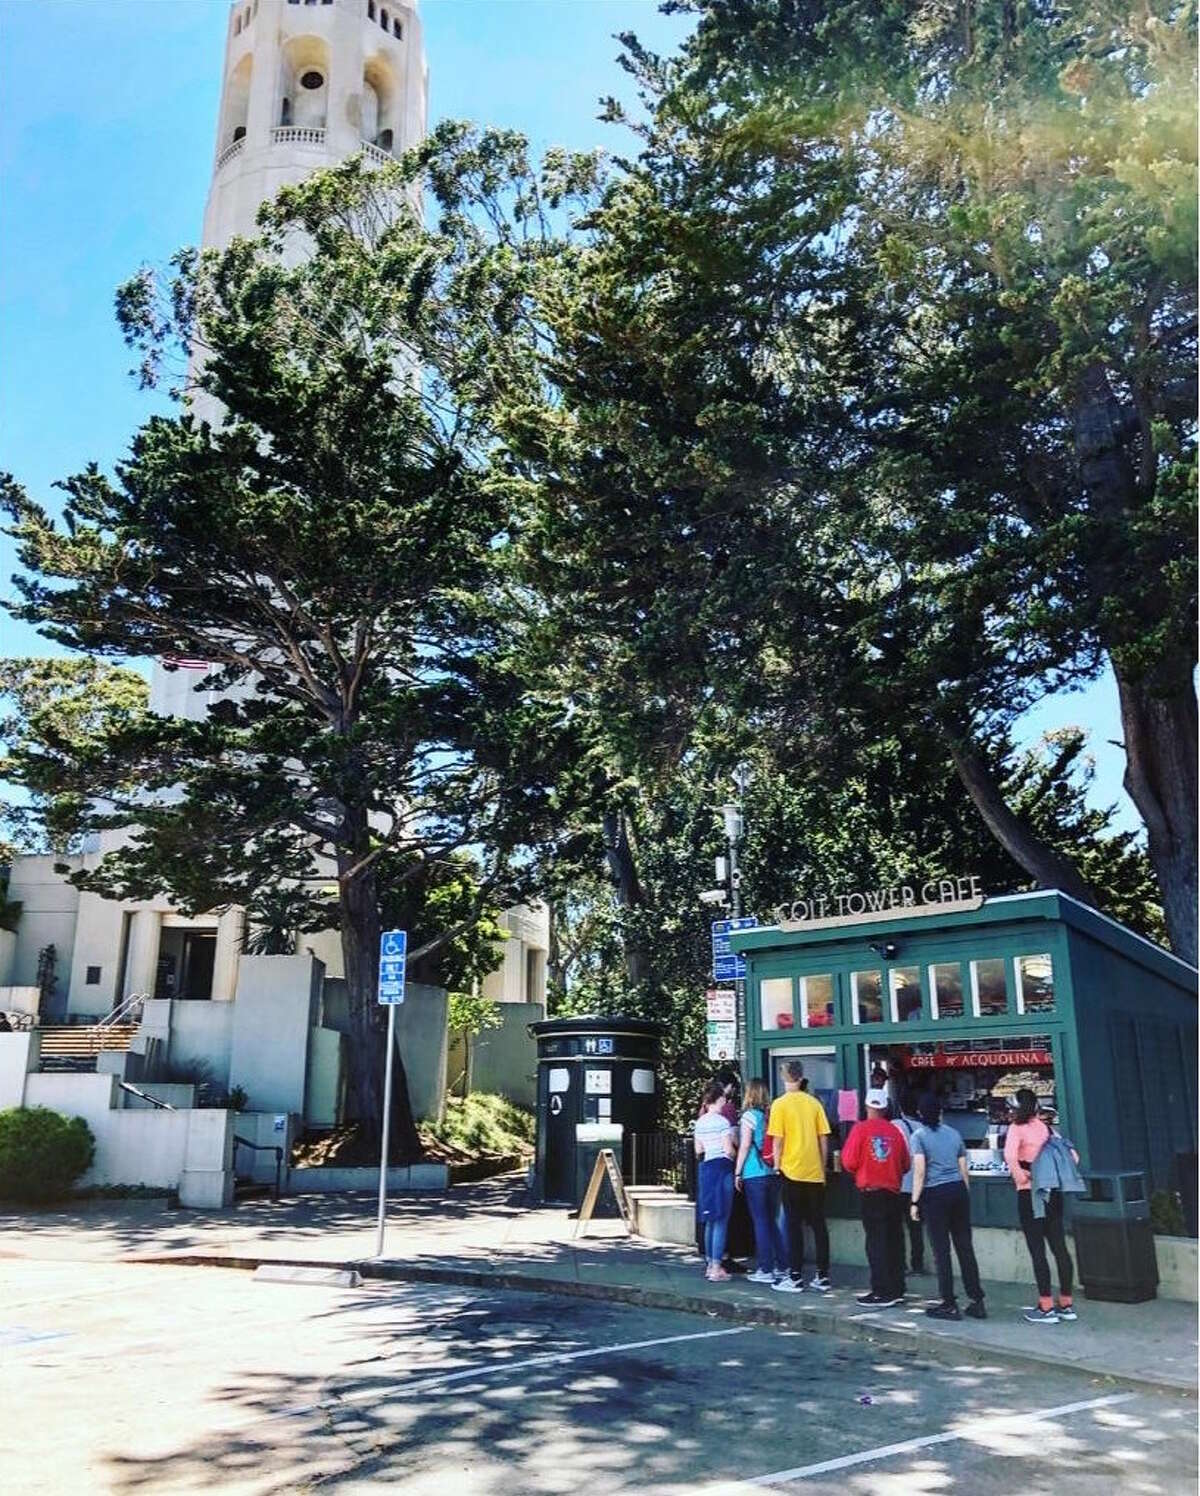 Coit Tower Cafe debuted Friday, July 12, 2019 and will offer a variety of snacks to visitors.